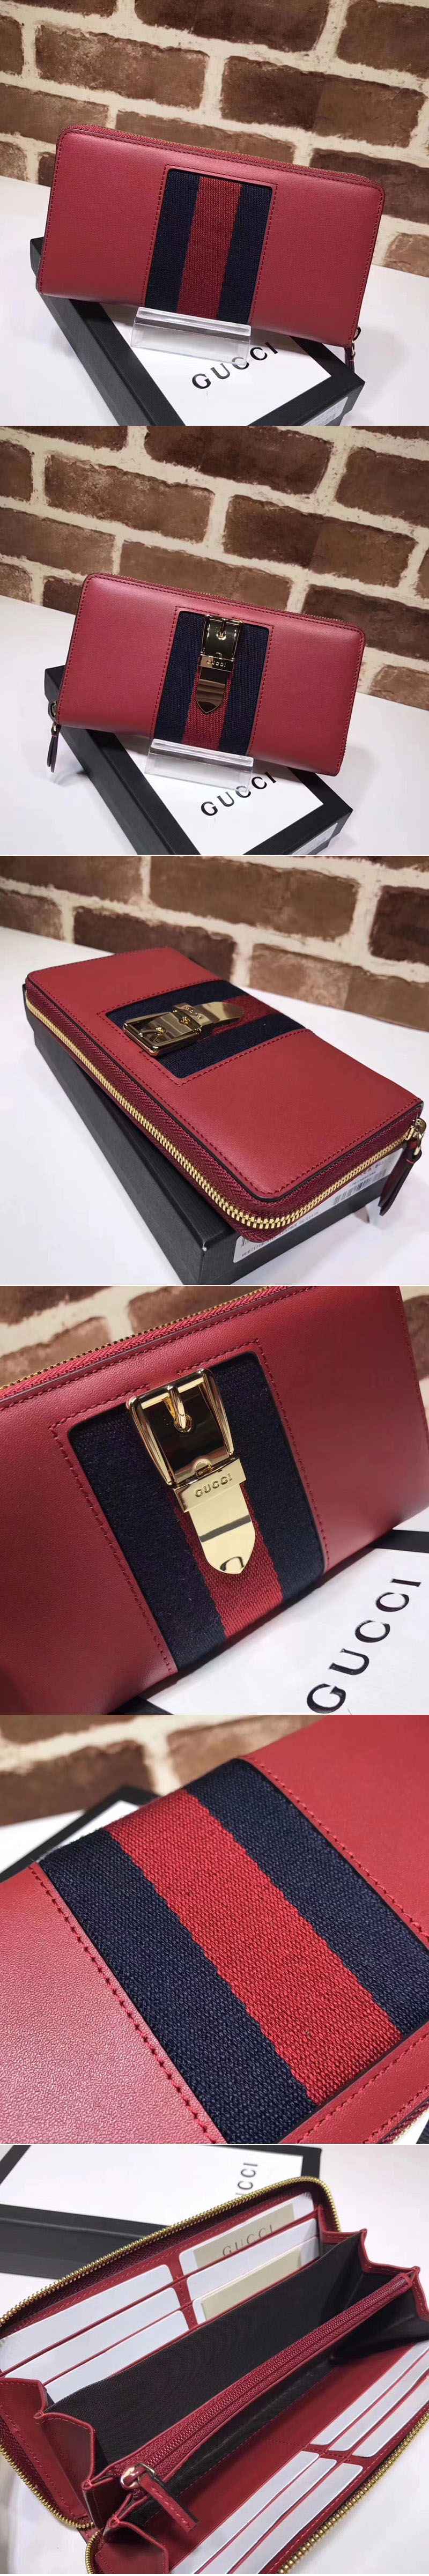 Replica Gucci 476083 Sylvie leather zip around wallet Red